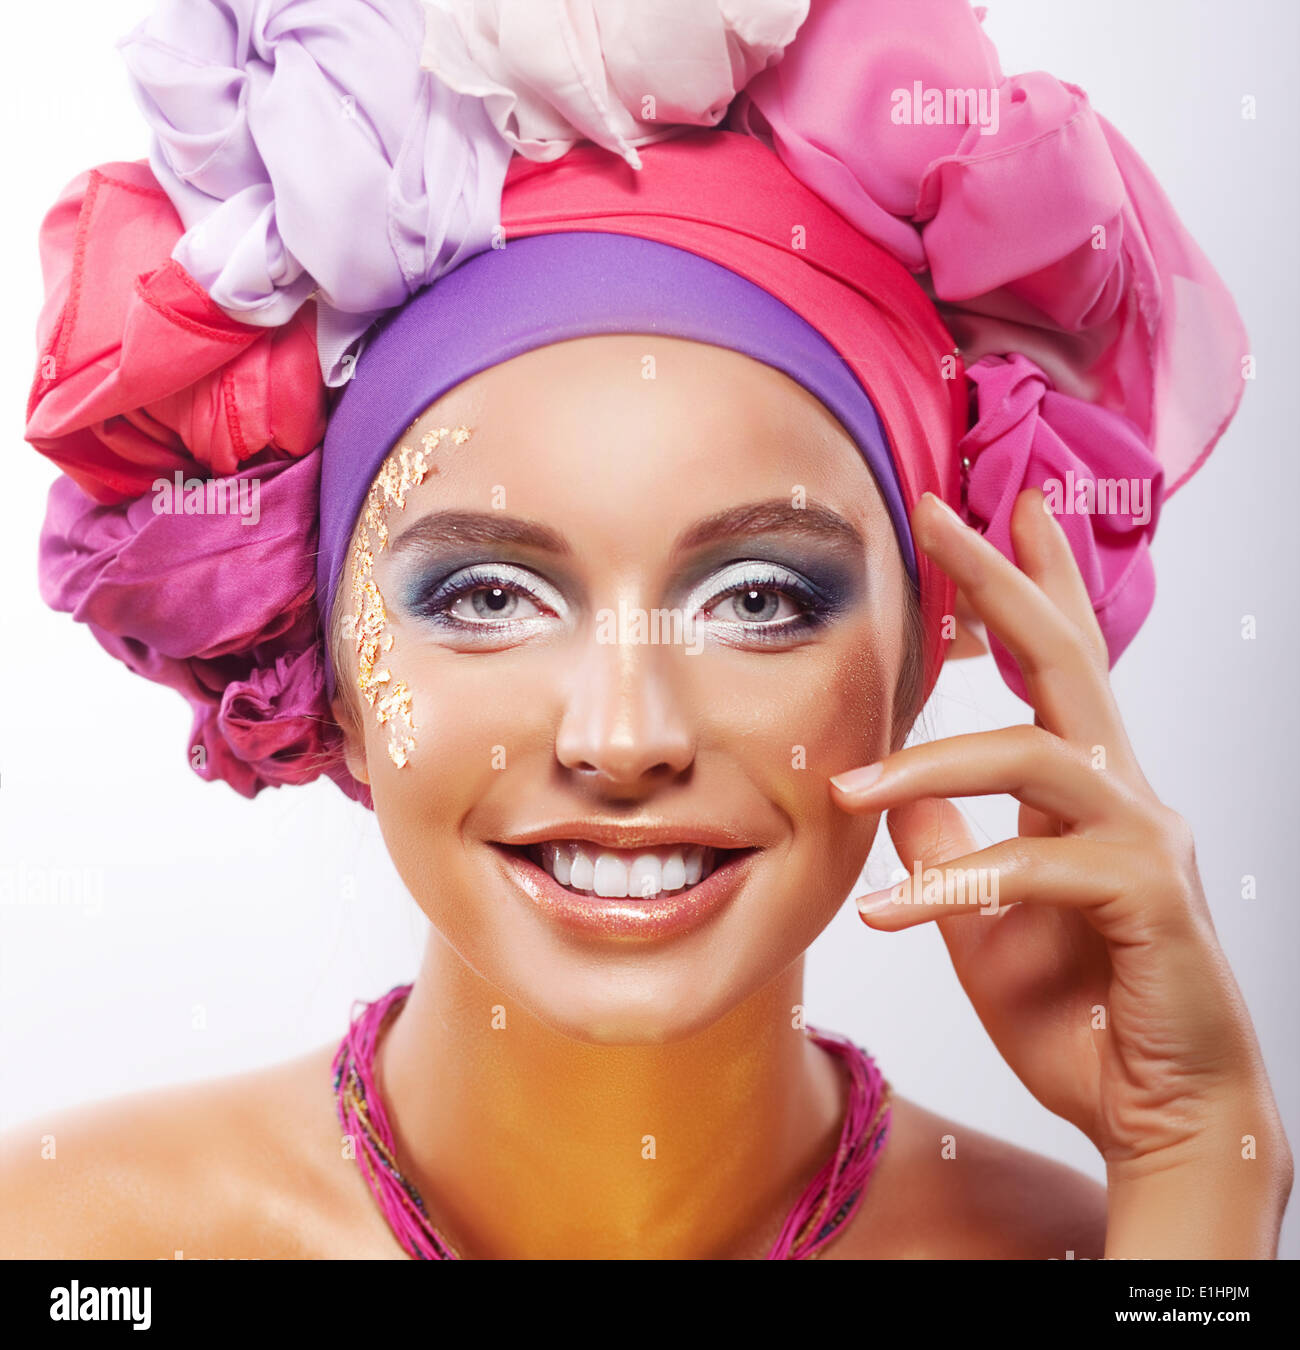 Lifestyle. Beauty. Portrait of young happy toothy smiling woman in colorful headwear Stock Photo